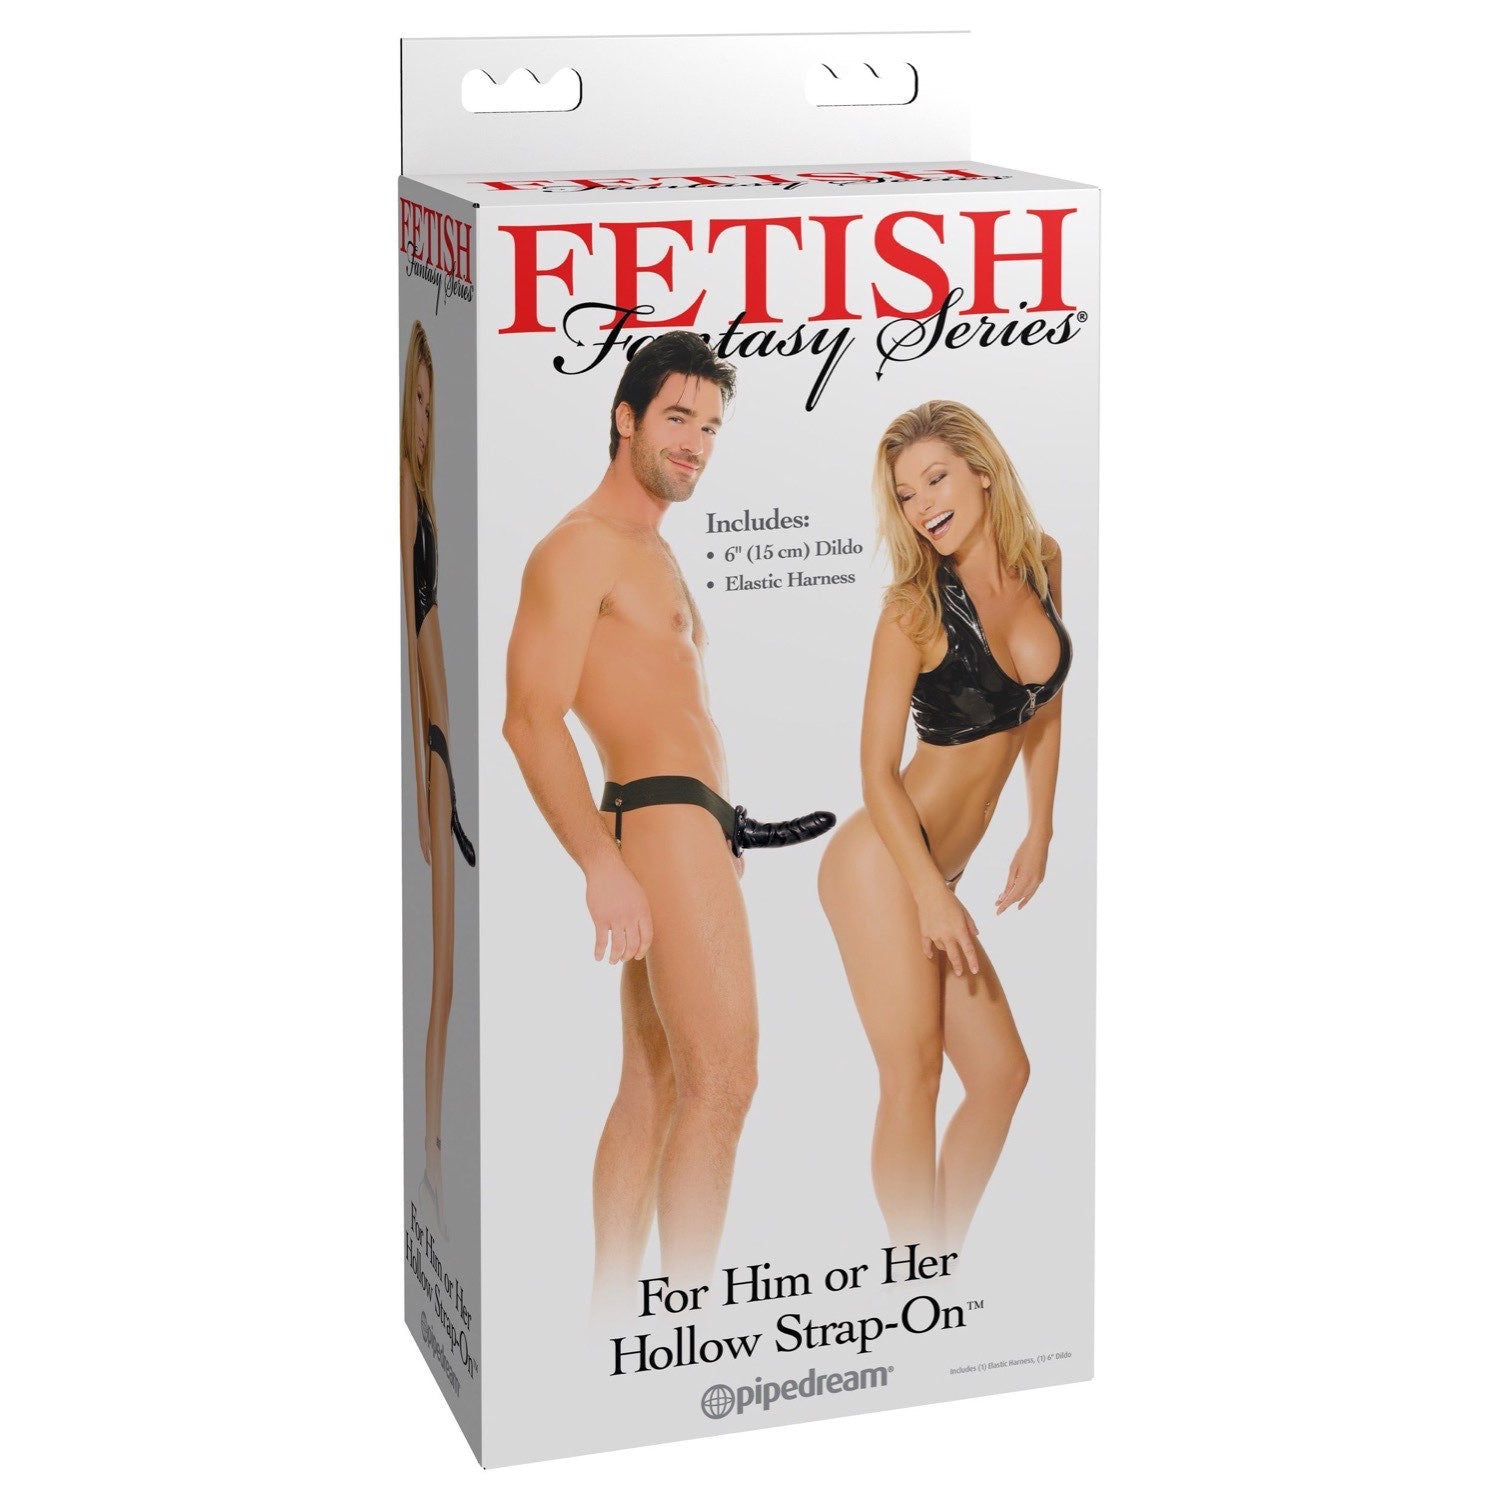 Fetish Fantasy Series For Him Or Her Hollow Strap-On - Black 15 cm (6&quot;) Hollow Strap-On by Pipedream